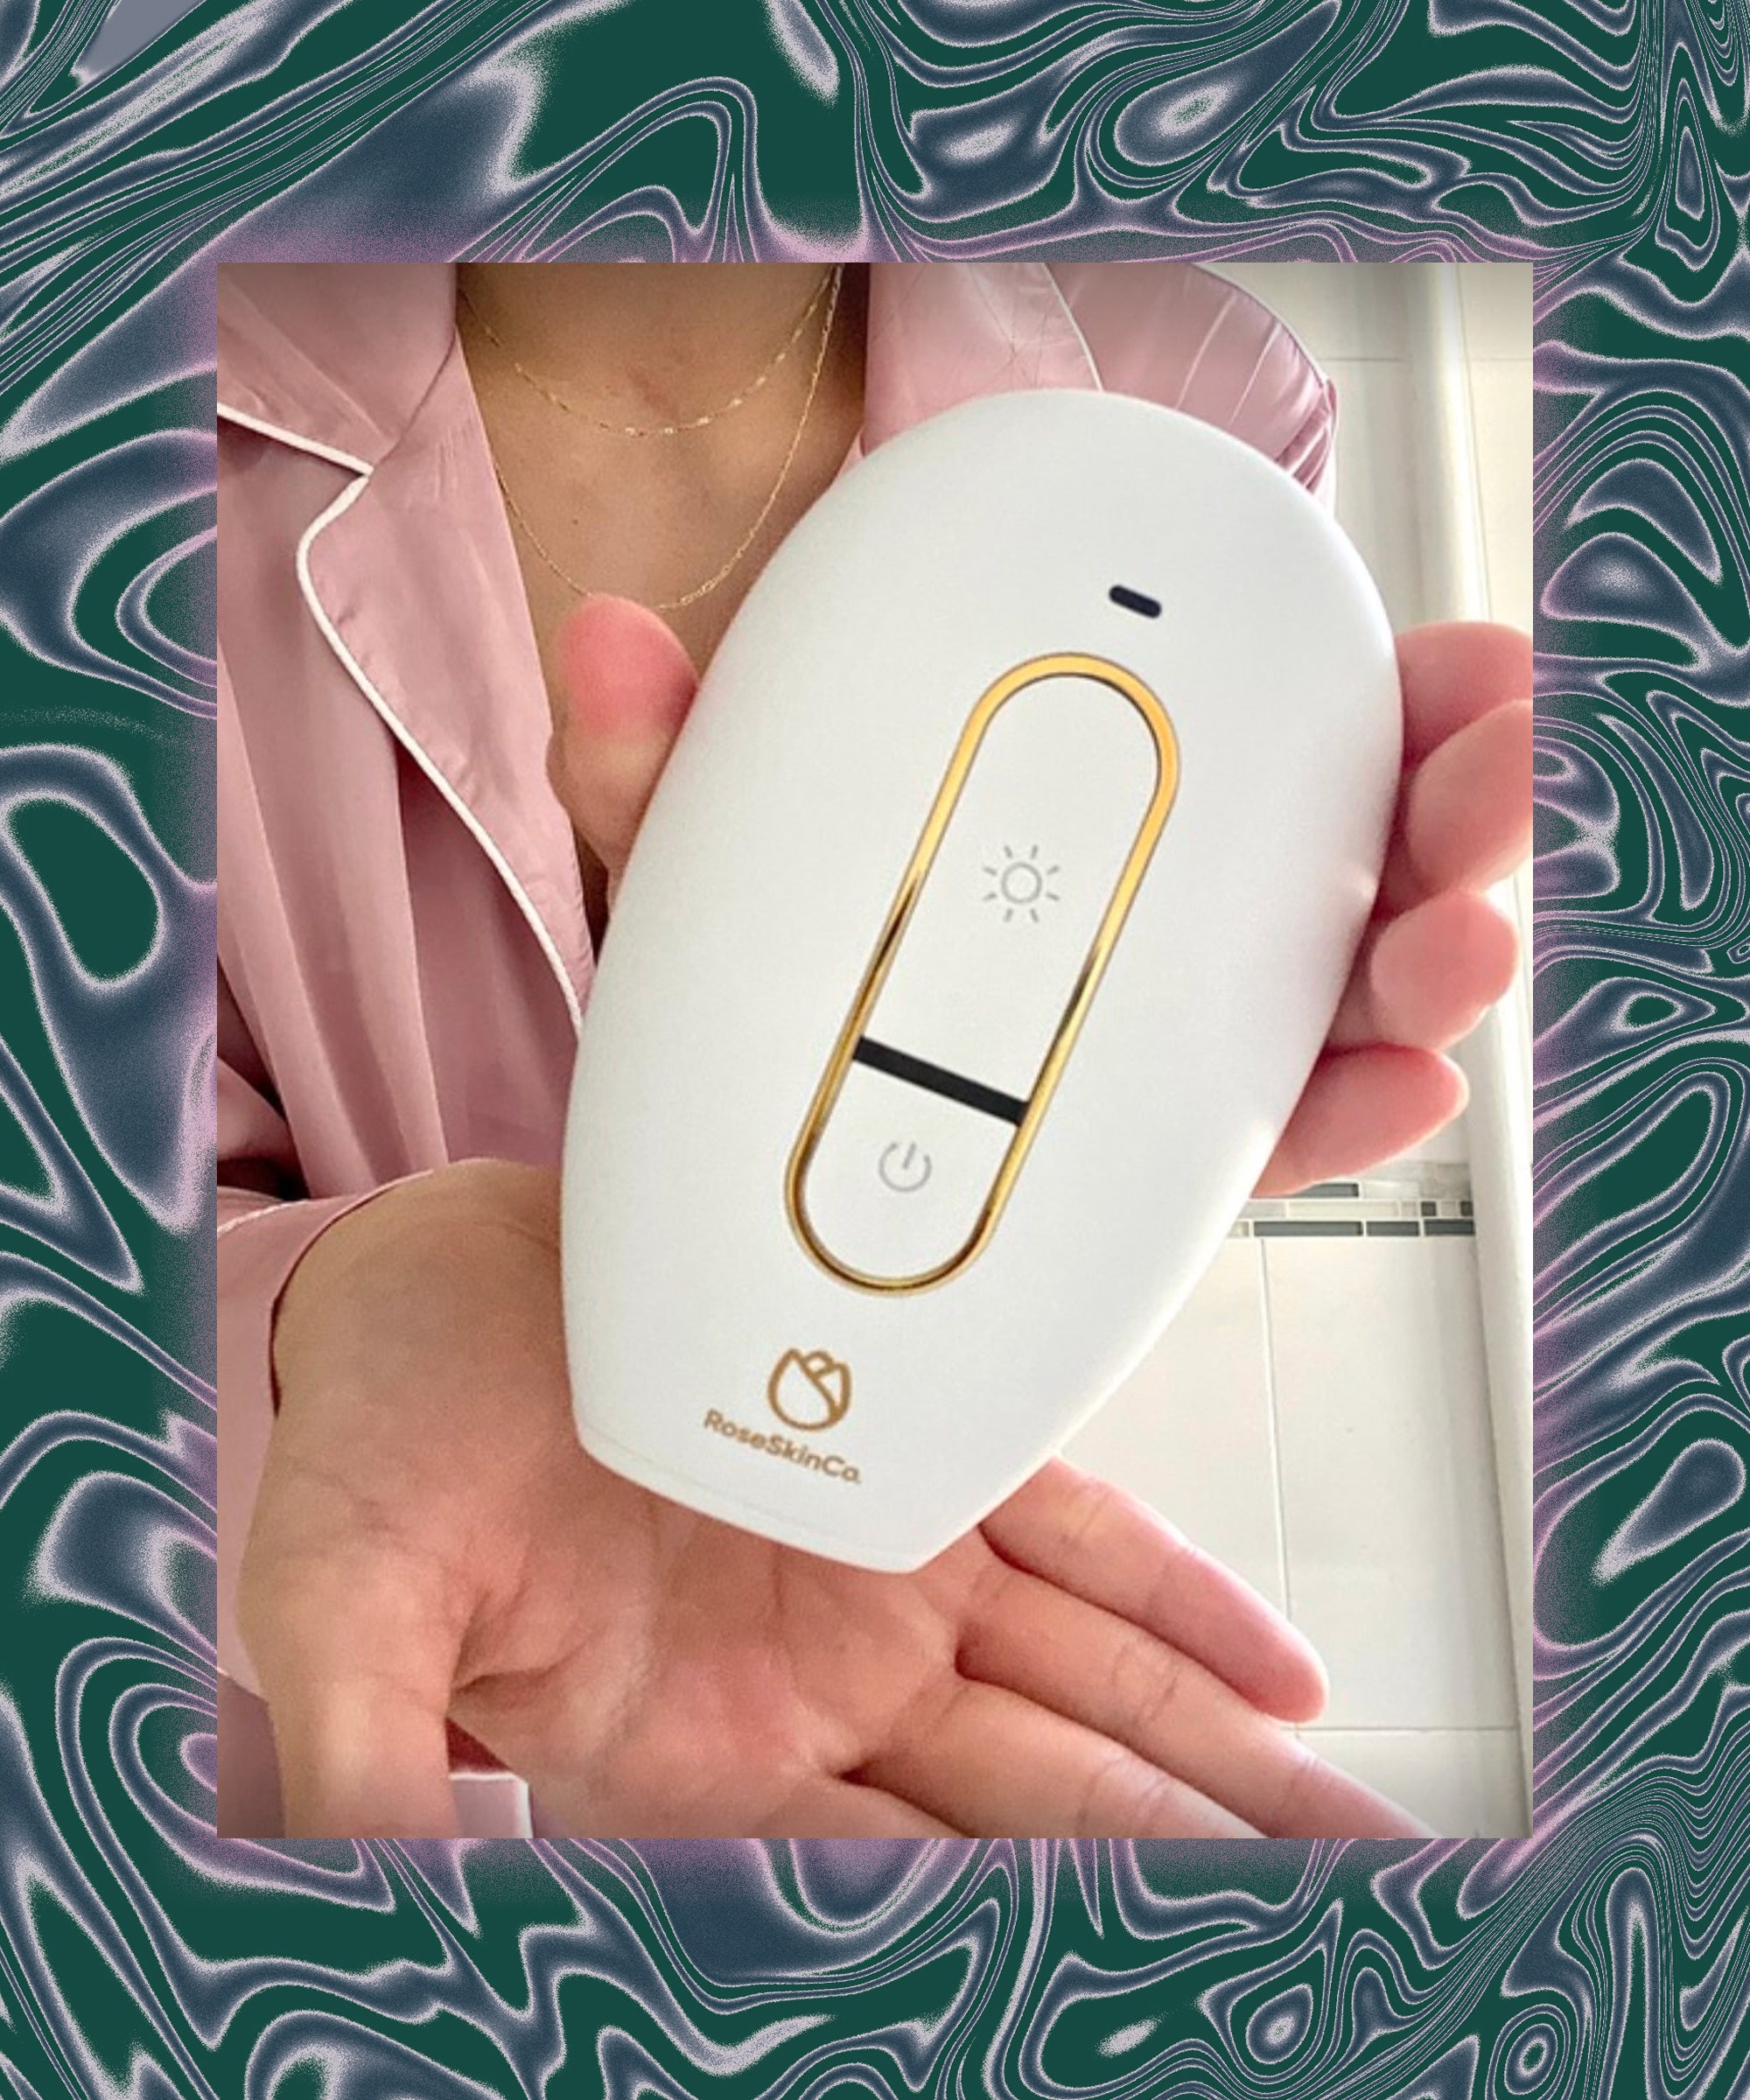 These IPL Hair Removal Devices Give You Lasting Smooth Skin at Home